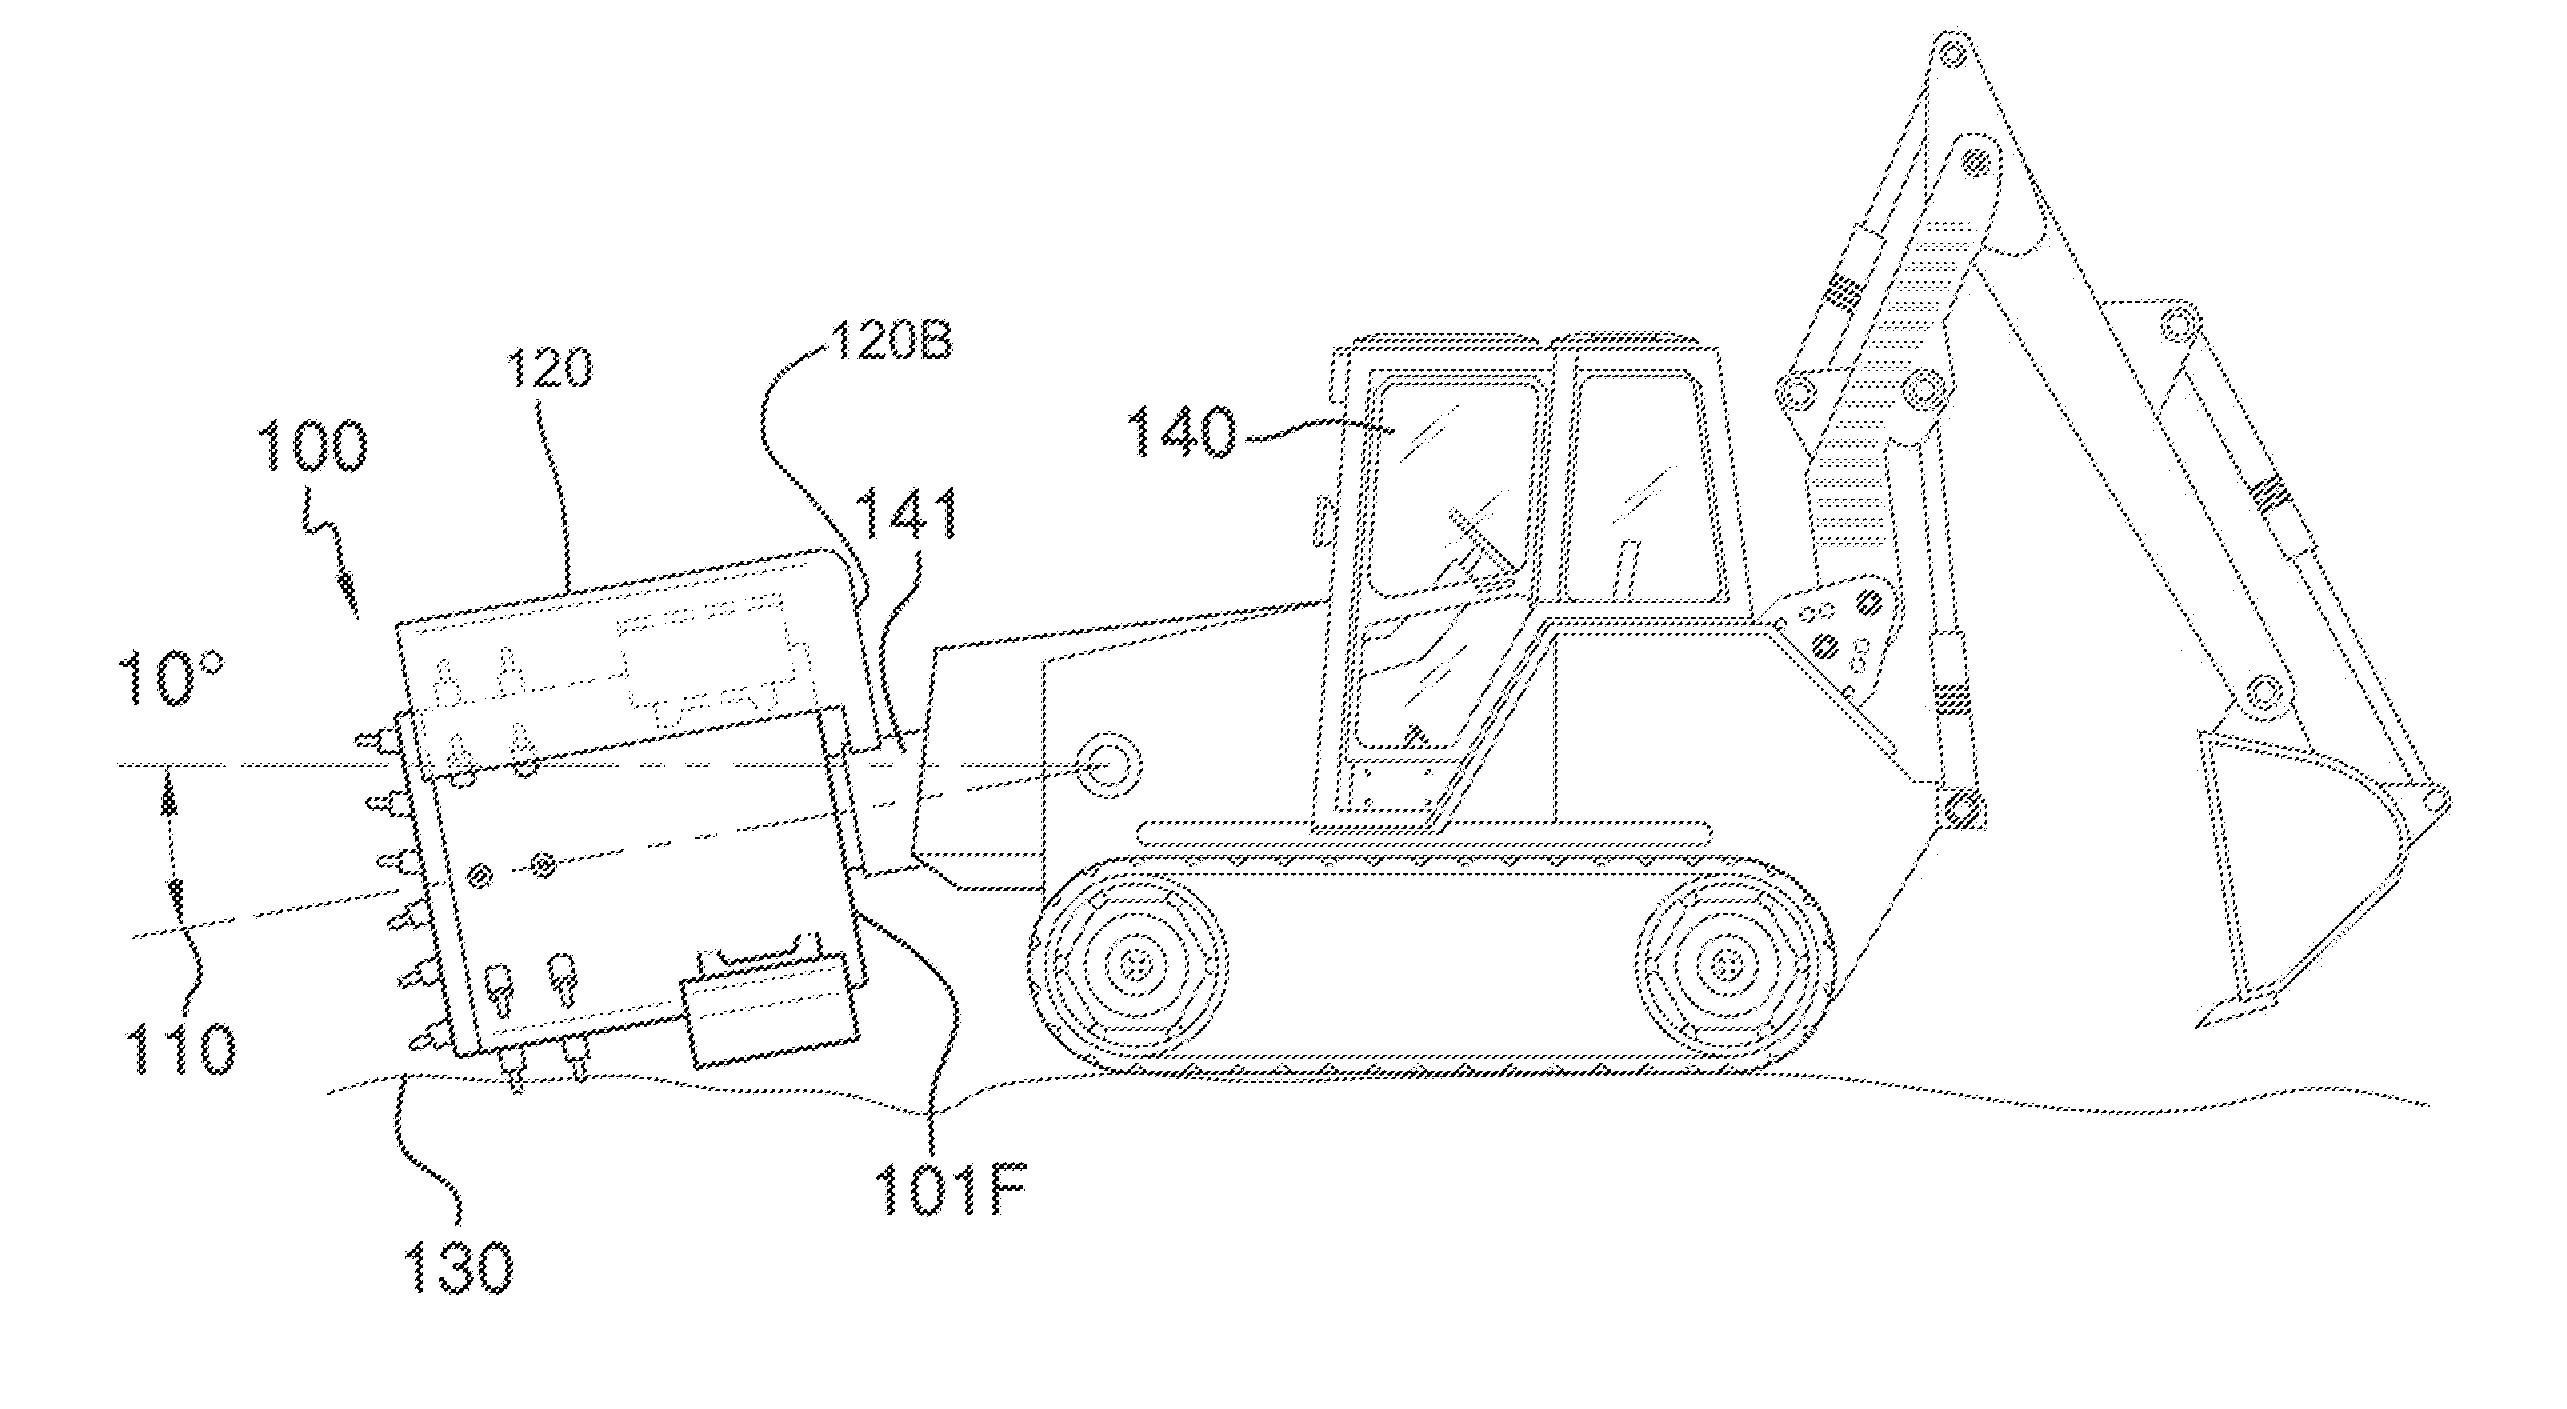 Ditch-cleaning device